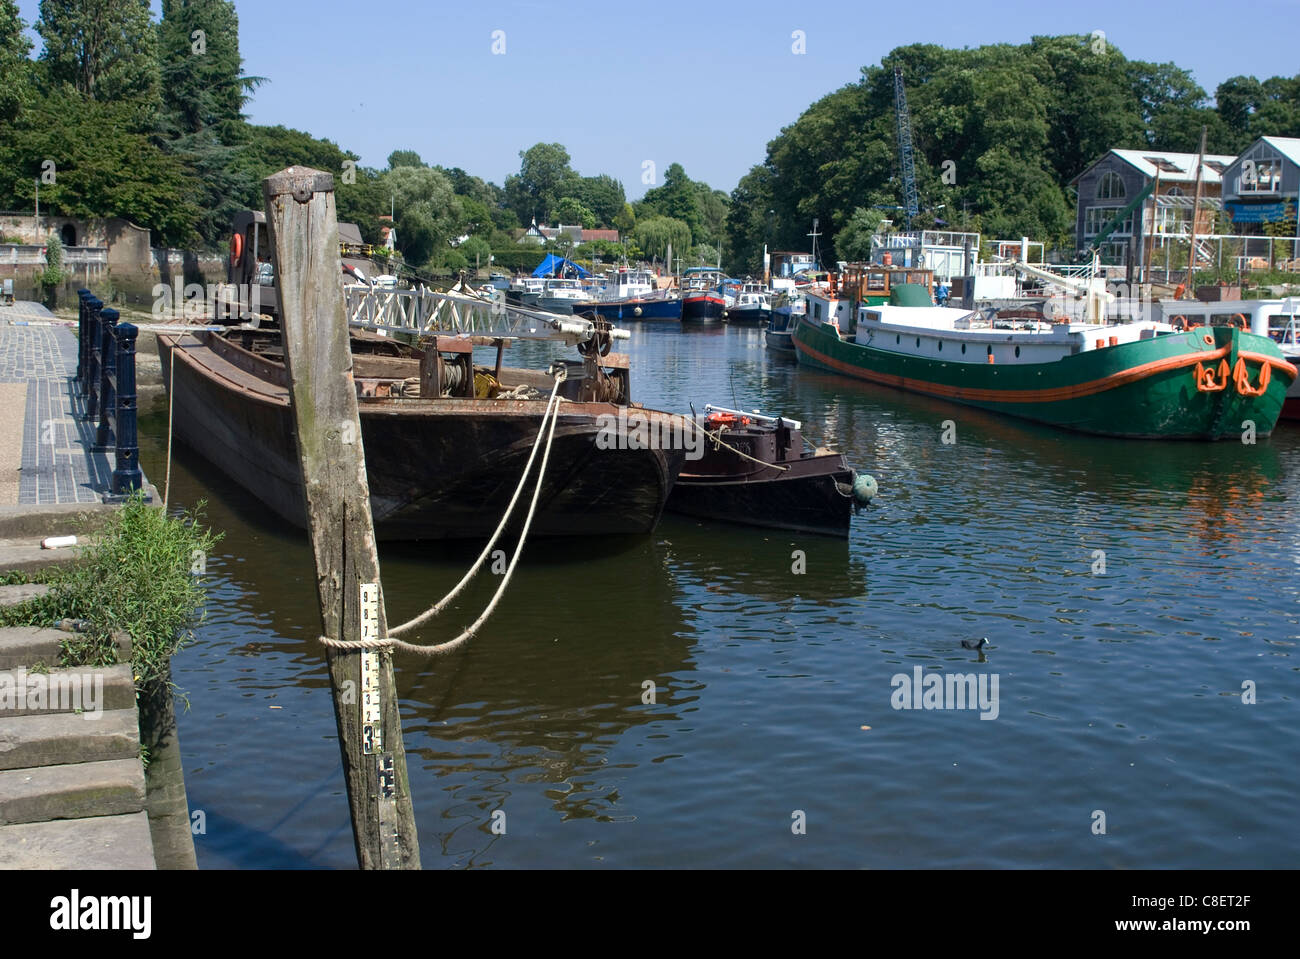 View of the Thames across from Eel Pie Island, near Richmond, Surrey, England, United Kingdom Stock Photo